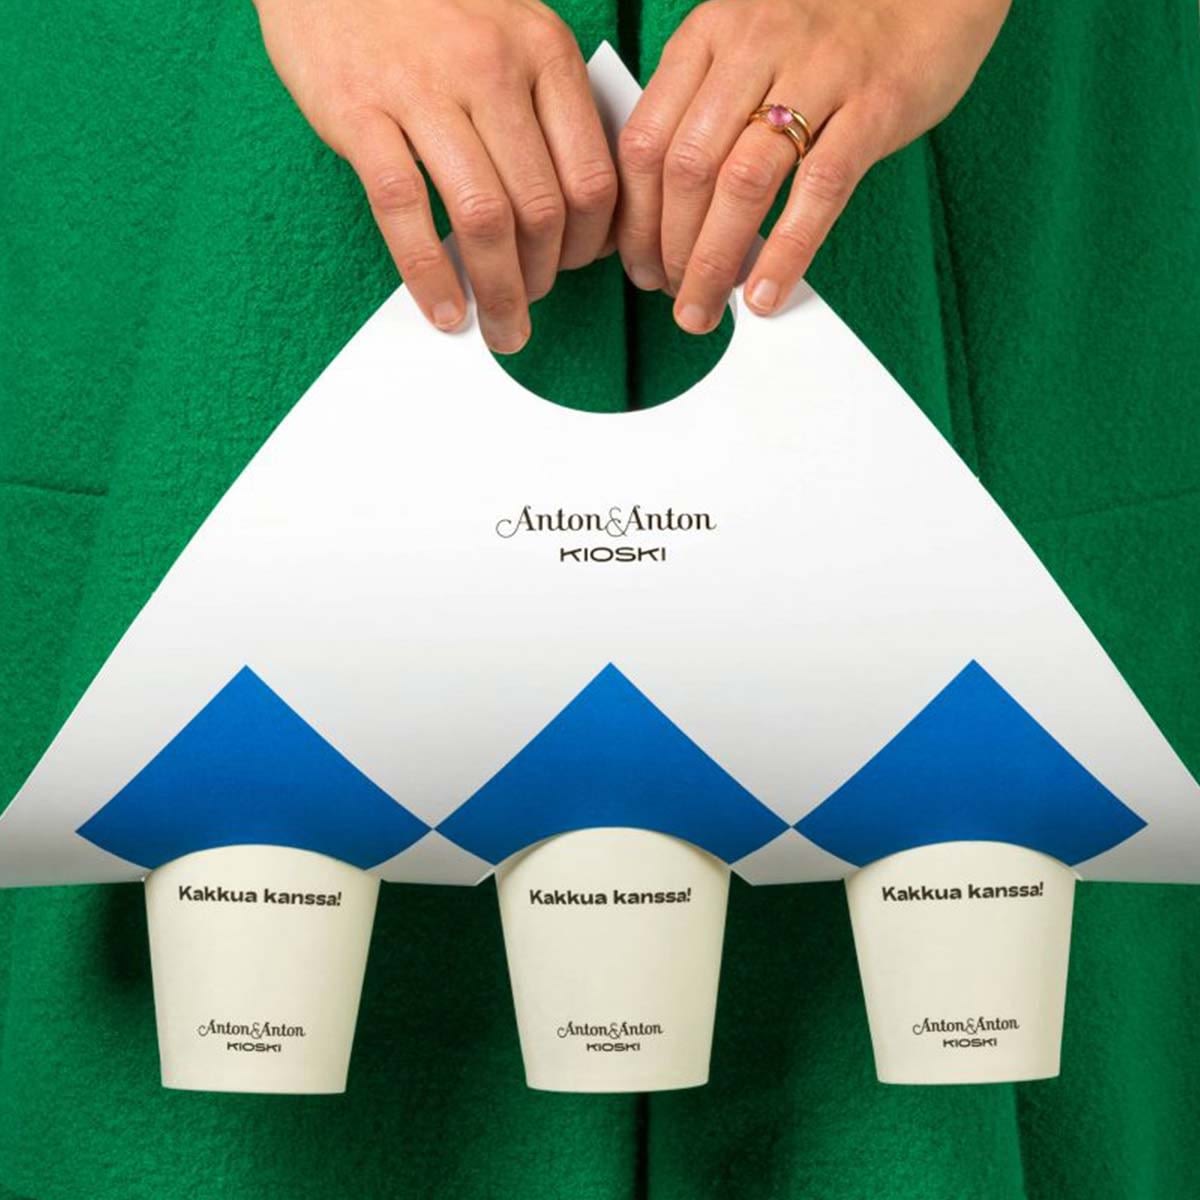 Branded biodegradable paper cups for Anton&Anton by Framme